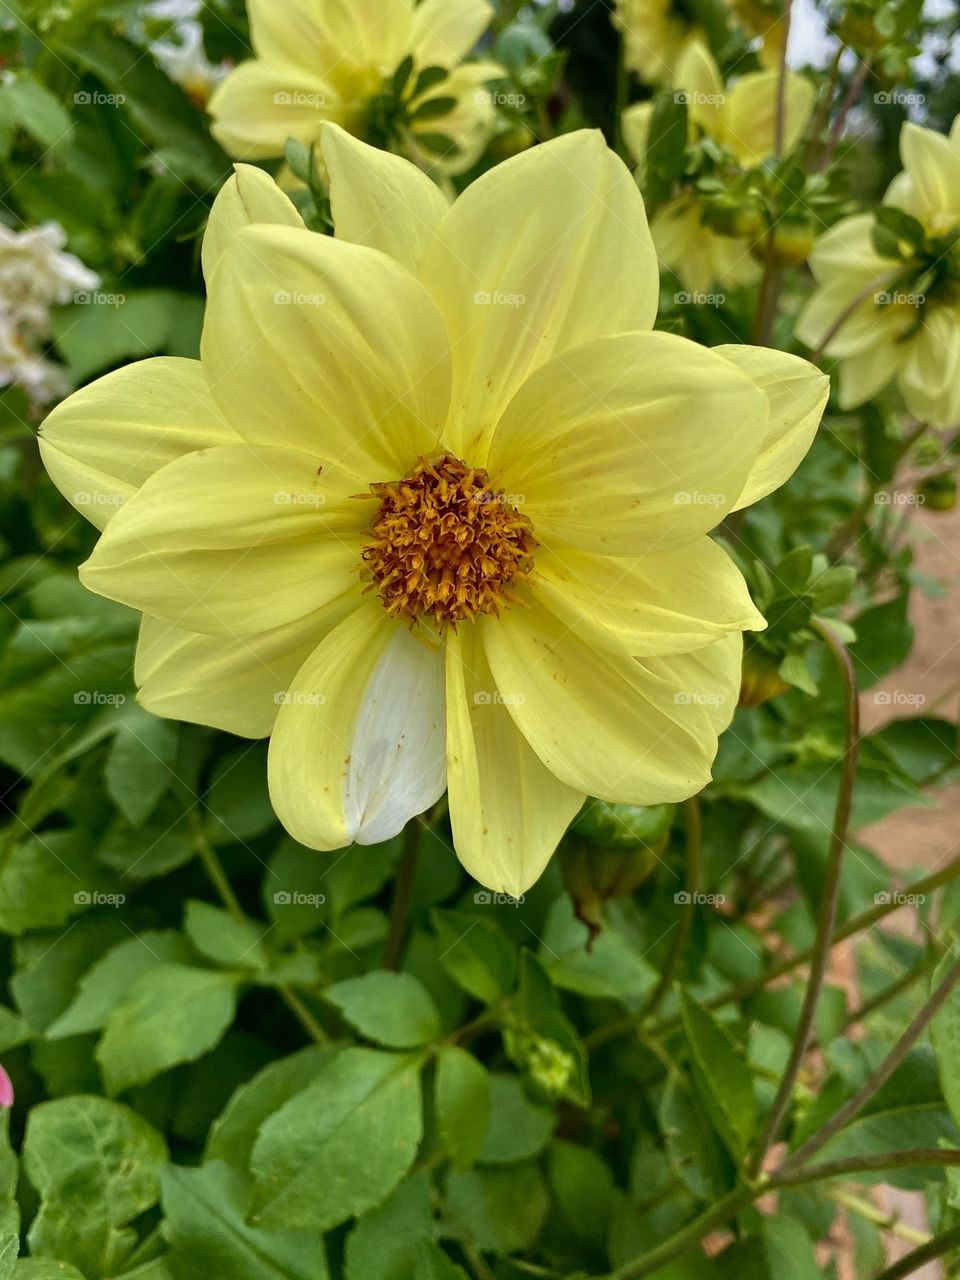 Yellow flower with a single white petal